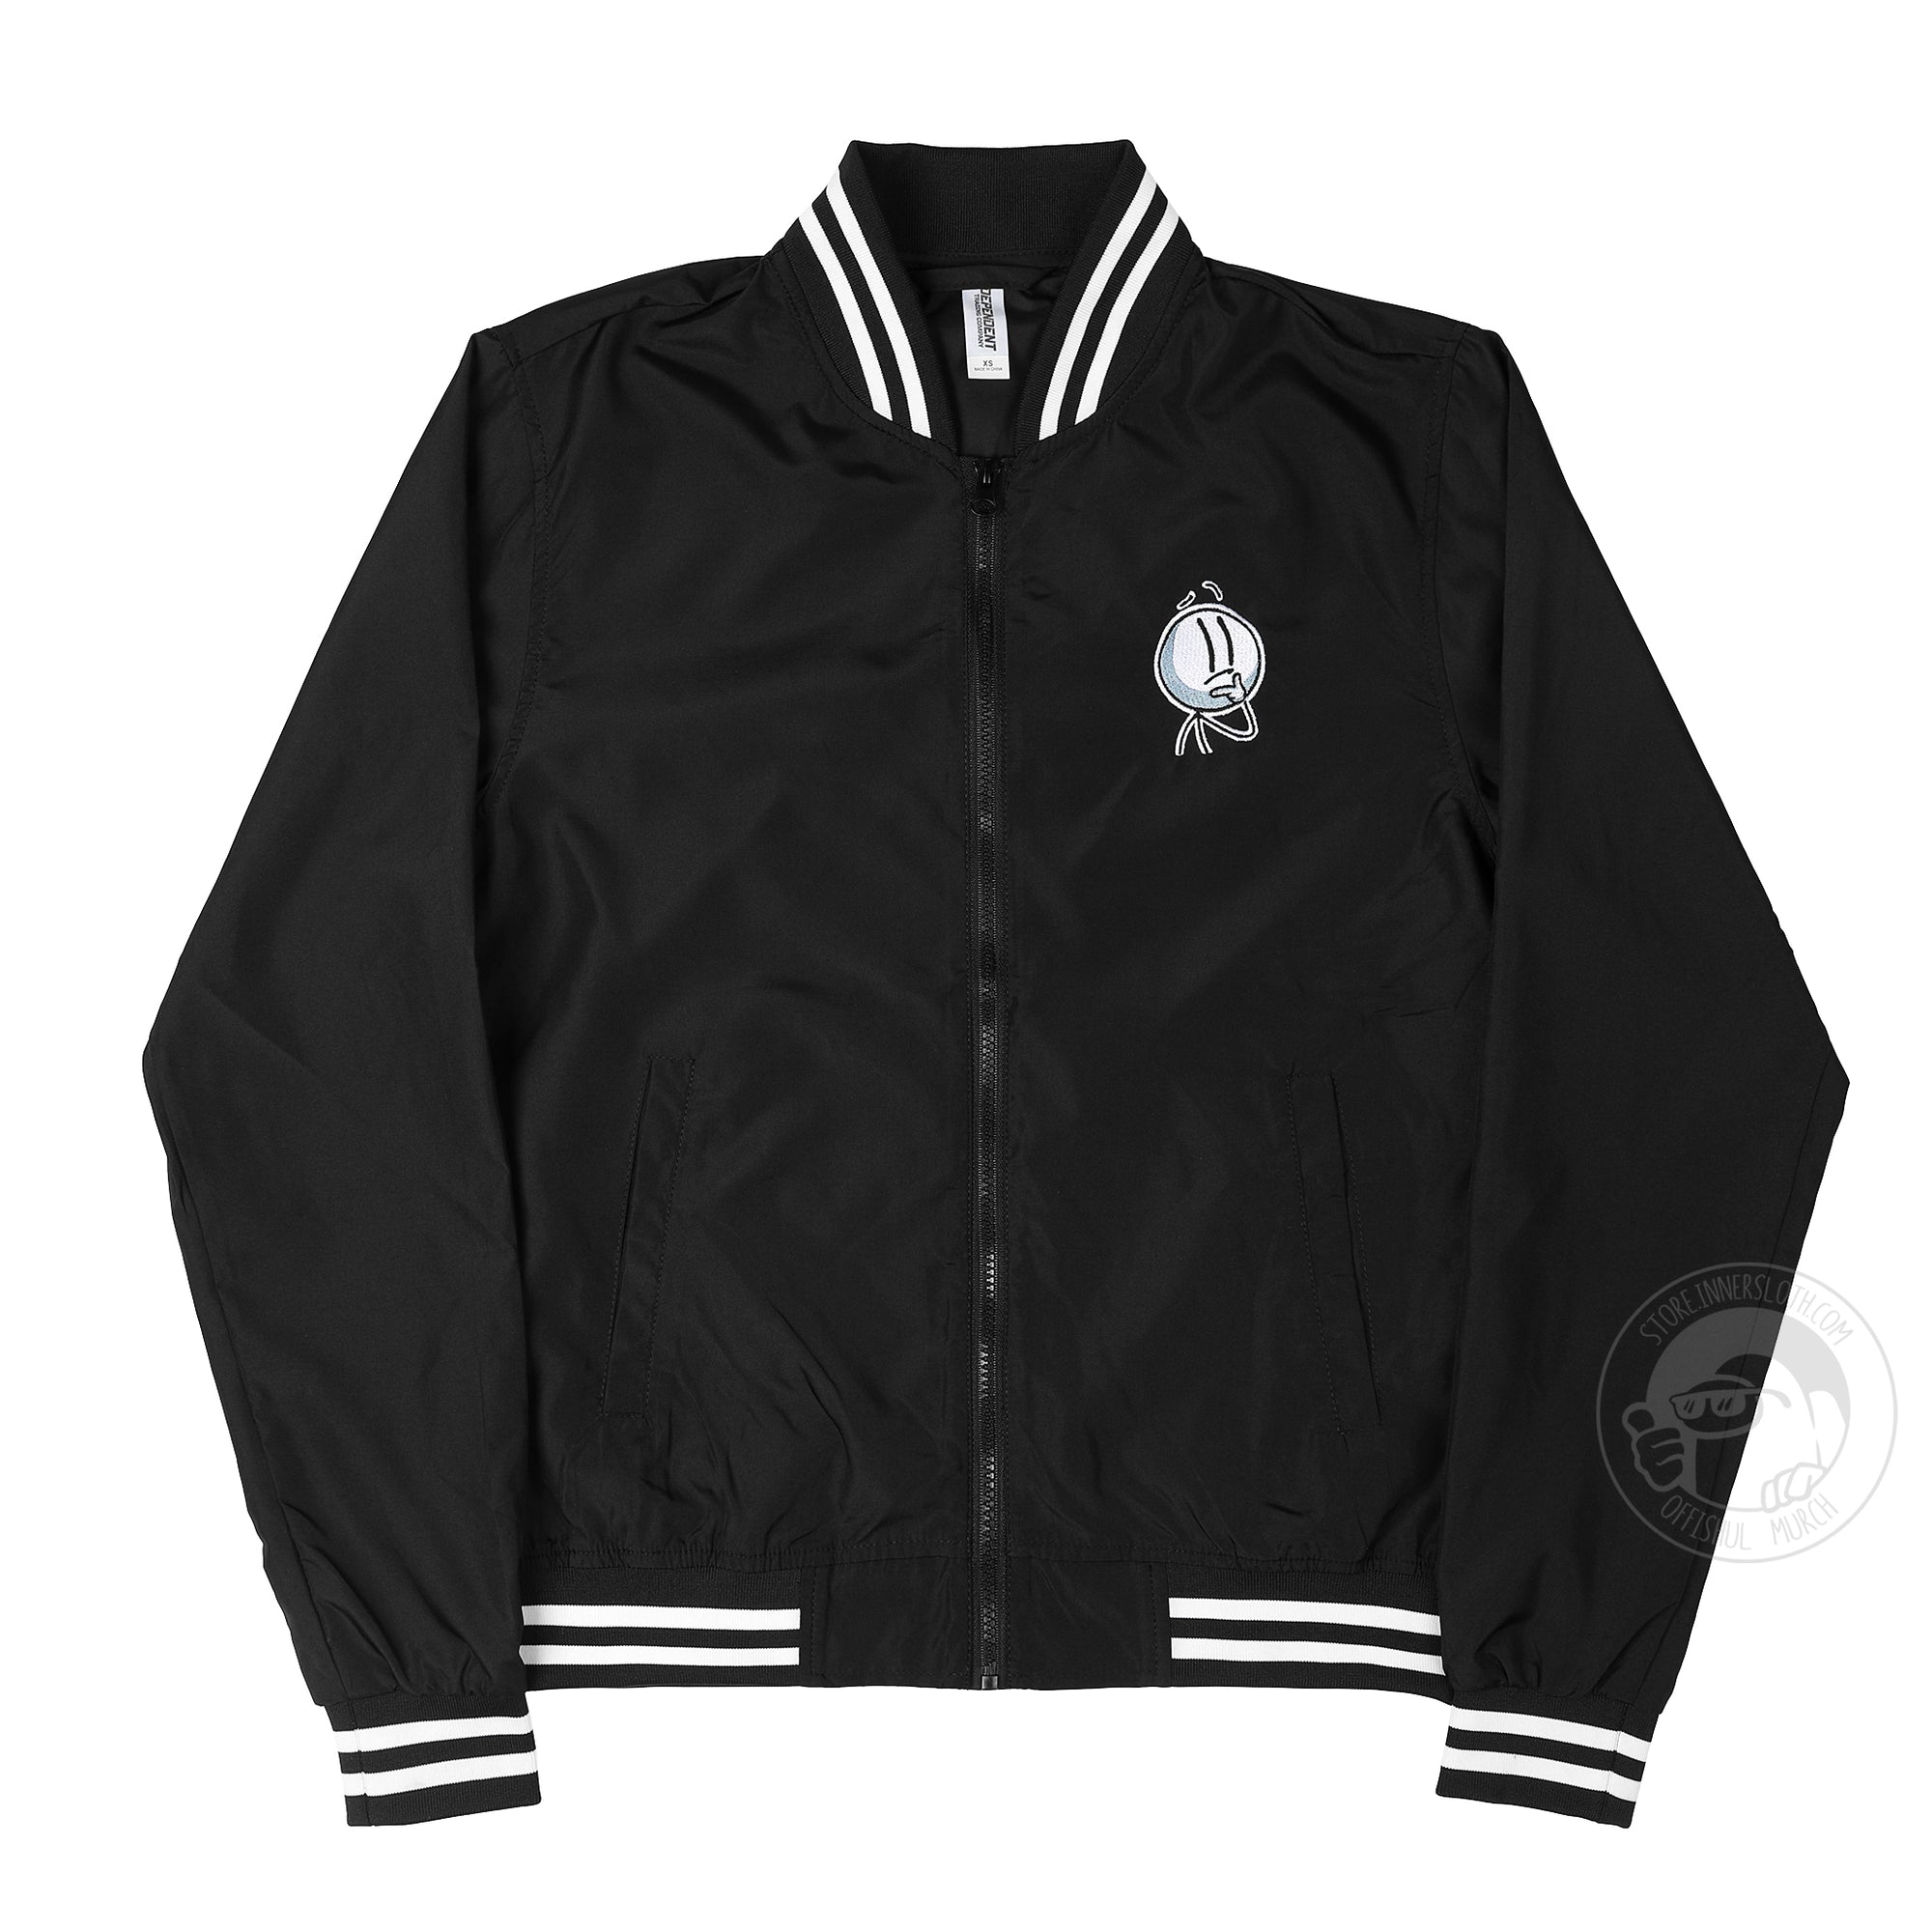 A flat-lay photograph of the black Henry Stickmin zippered bomber jacket on a white background. The front of the jacket has a single embroidered detail of the Henry Stickmin character in a thinking pose over the right breast. The collar, waistband, and sleeve cuffs have five alternating black and white stripes woven into the ribknit. The jacket is designed by PuffballsUnited and Embroidered by GlassEmbroidery.